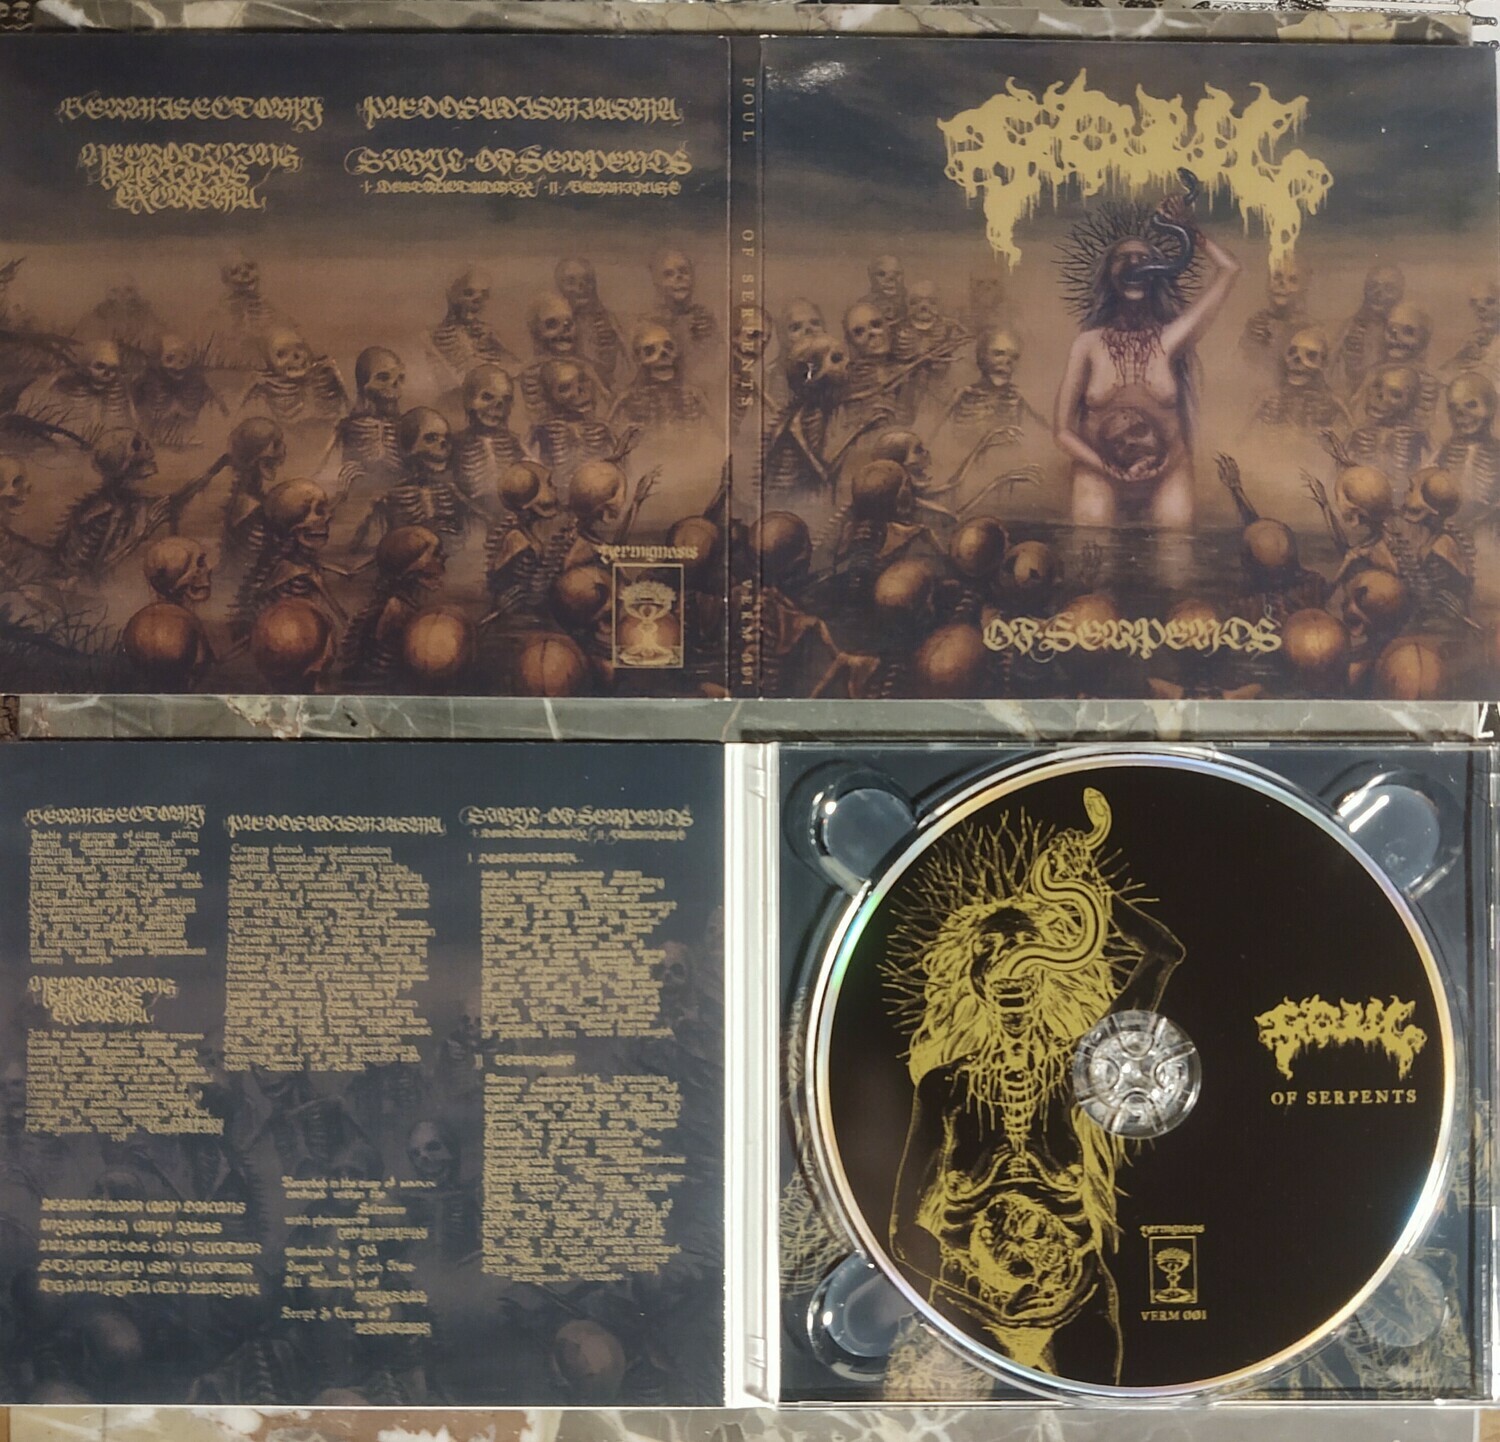 FOUL 'Of Serpents' CD